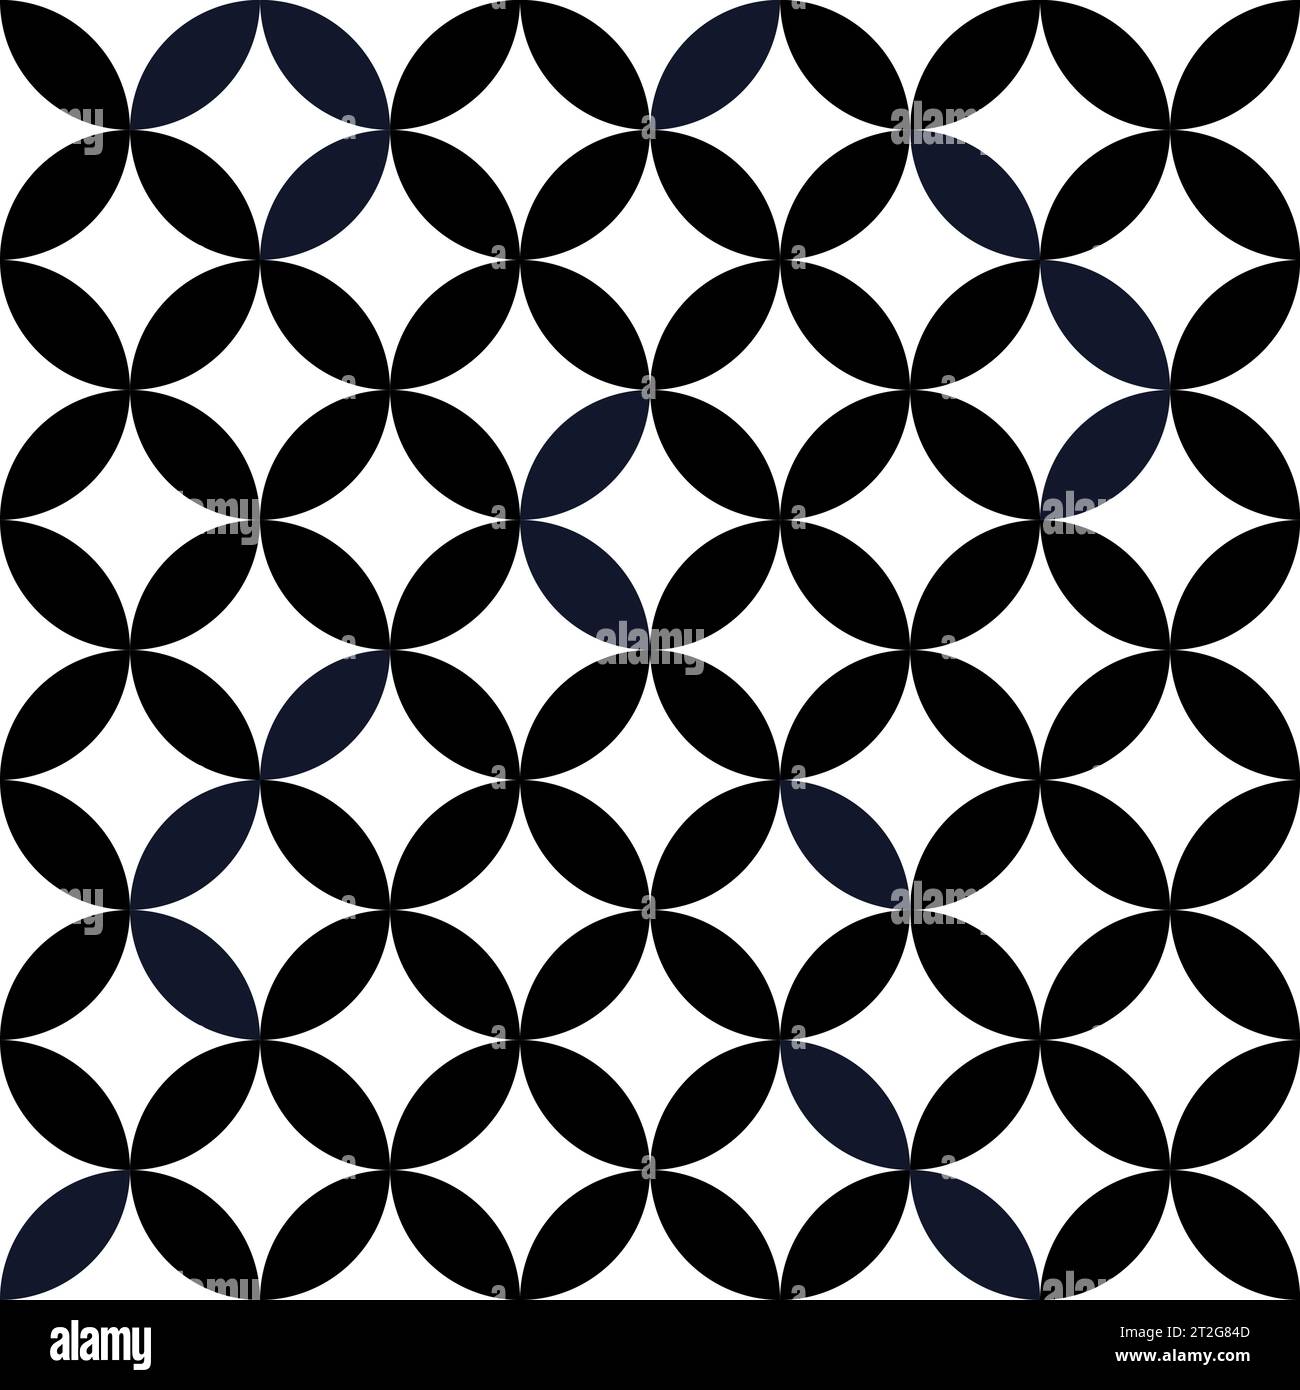 Simple geometric pattern. Overlapping circles and ovals abstract retro fashion texture. Seamless pattern. Stock Vector